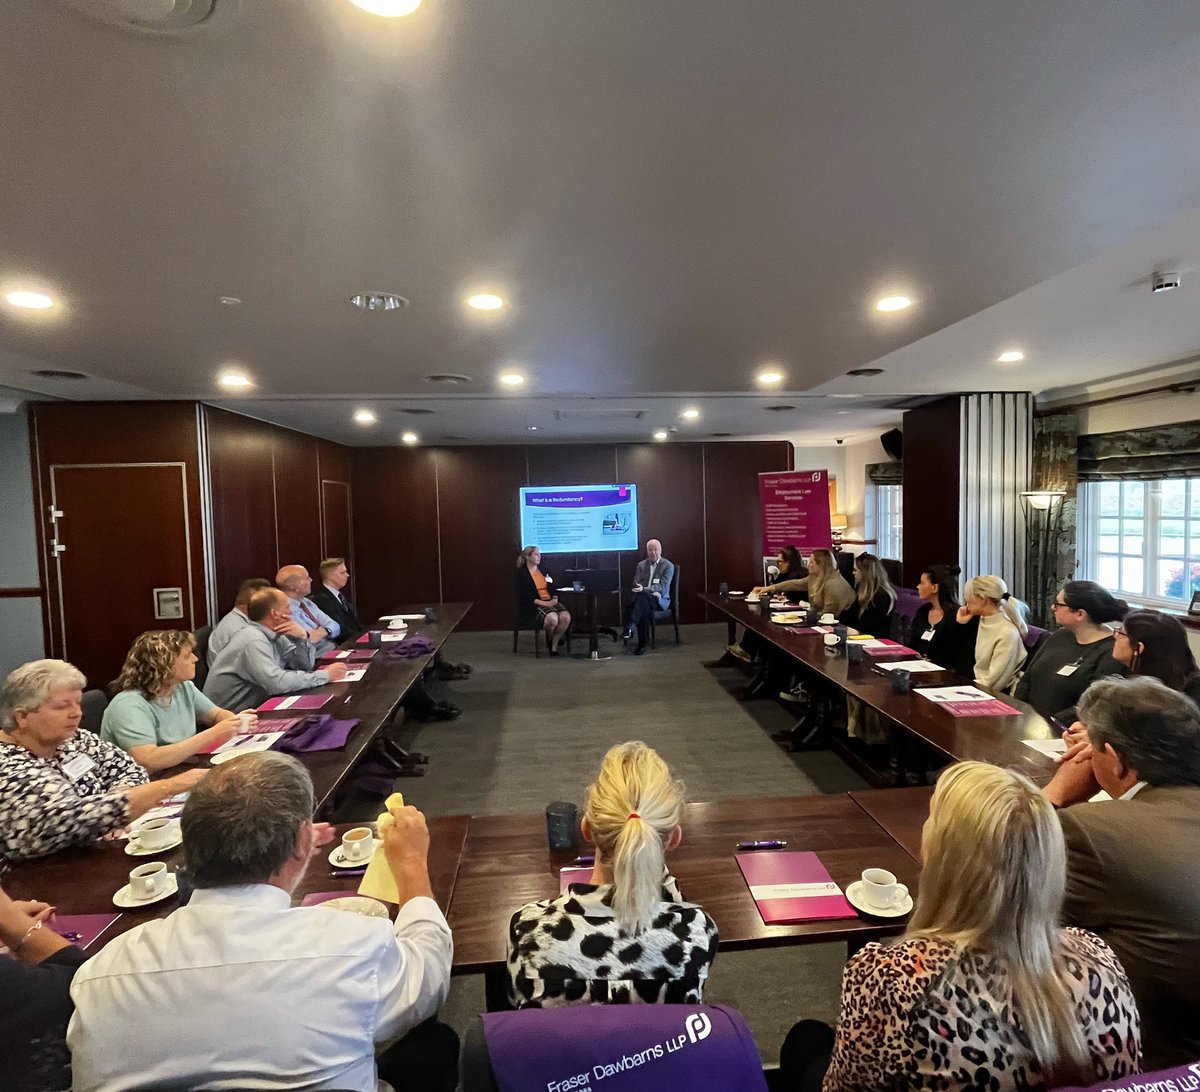 Another early start for guests arriving at our #Wisbech employment law seminar series. We are at the Crown Lodge Hotel discussing the new changes to the law this Spring, including the Worker Protection Act 2023. A fantastic turnout for our last event before the #Maybankholiday!